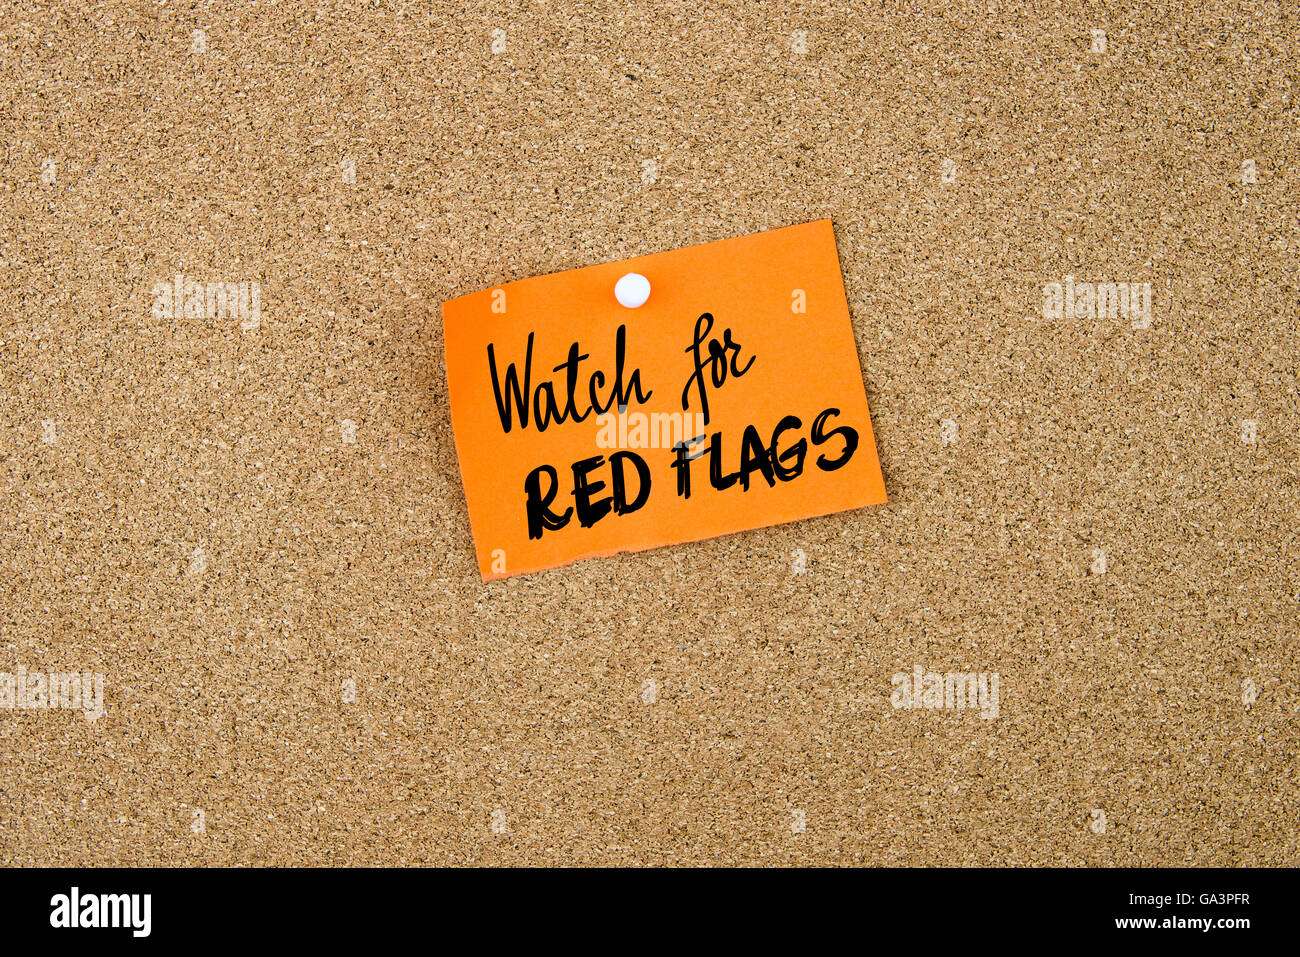 Watch For Red Flags written on orange paper note note pinned on cork board with white thumbtack, copy space available Stock Photo